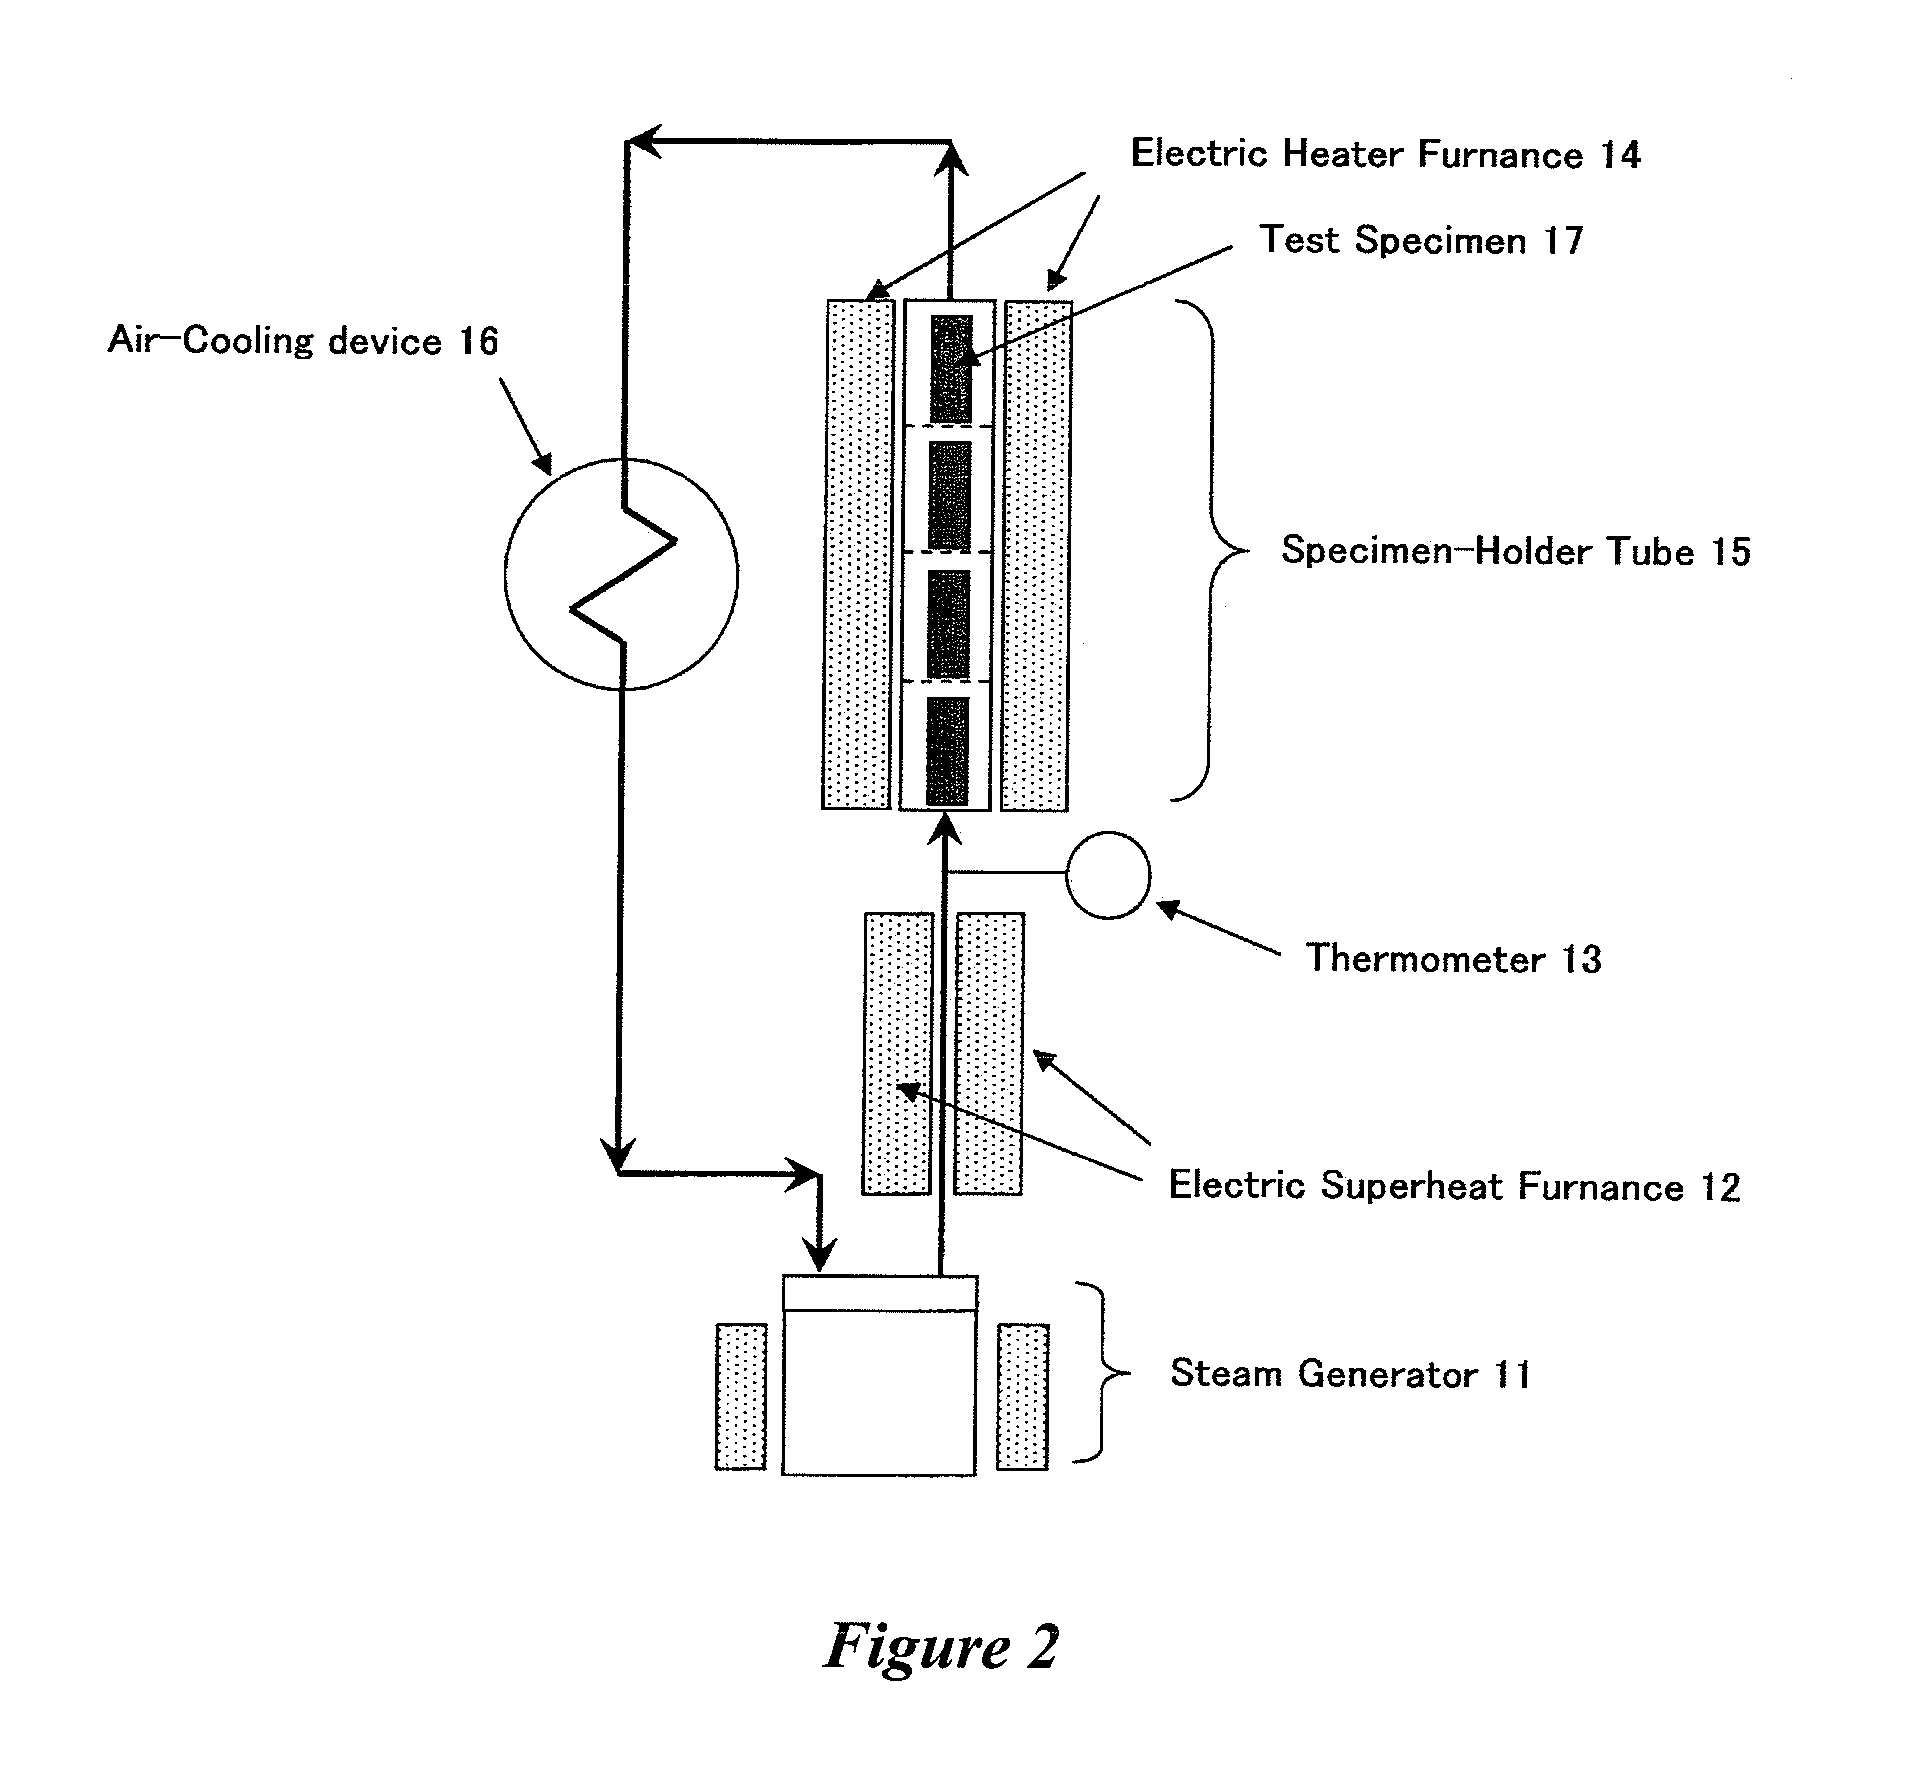 Method for treatment of iron-based metal surface exposed to superheated steam